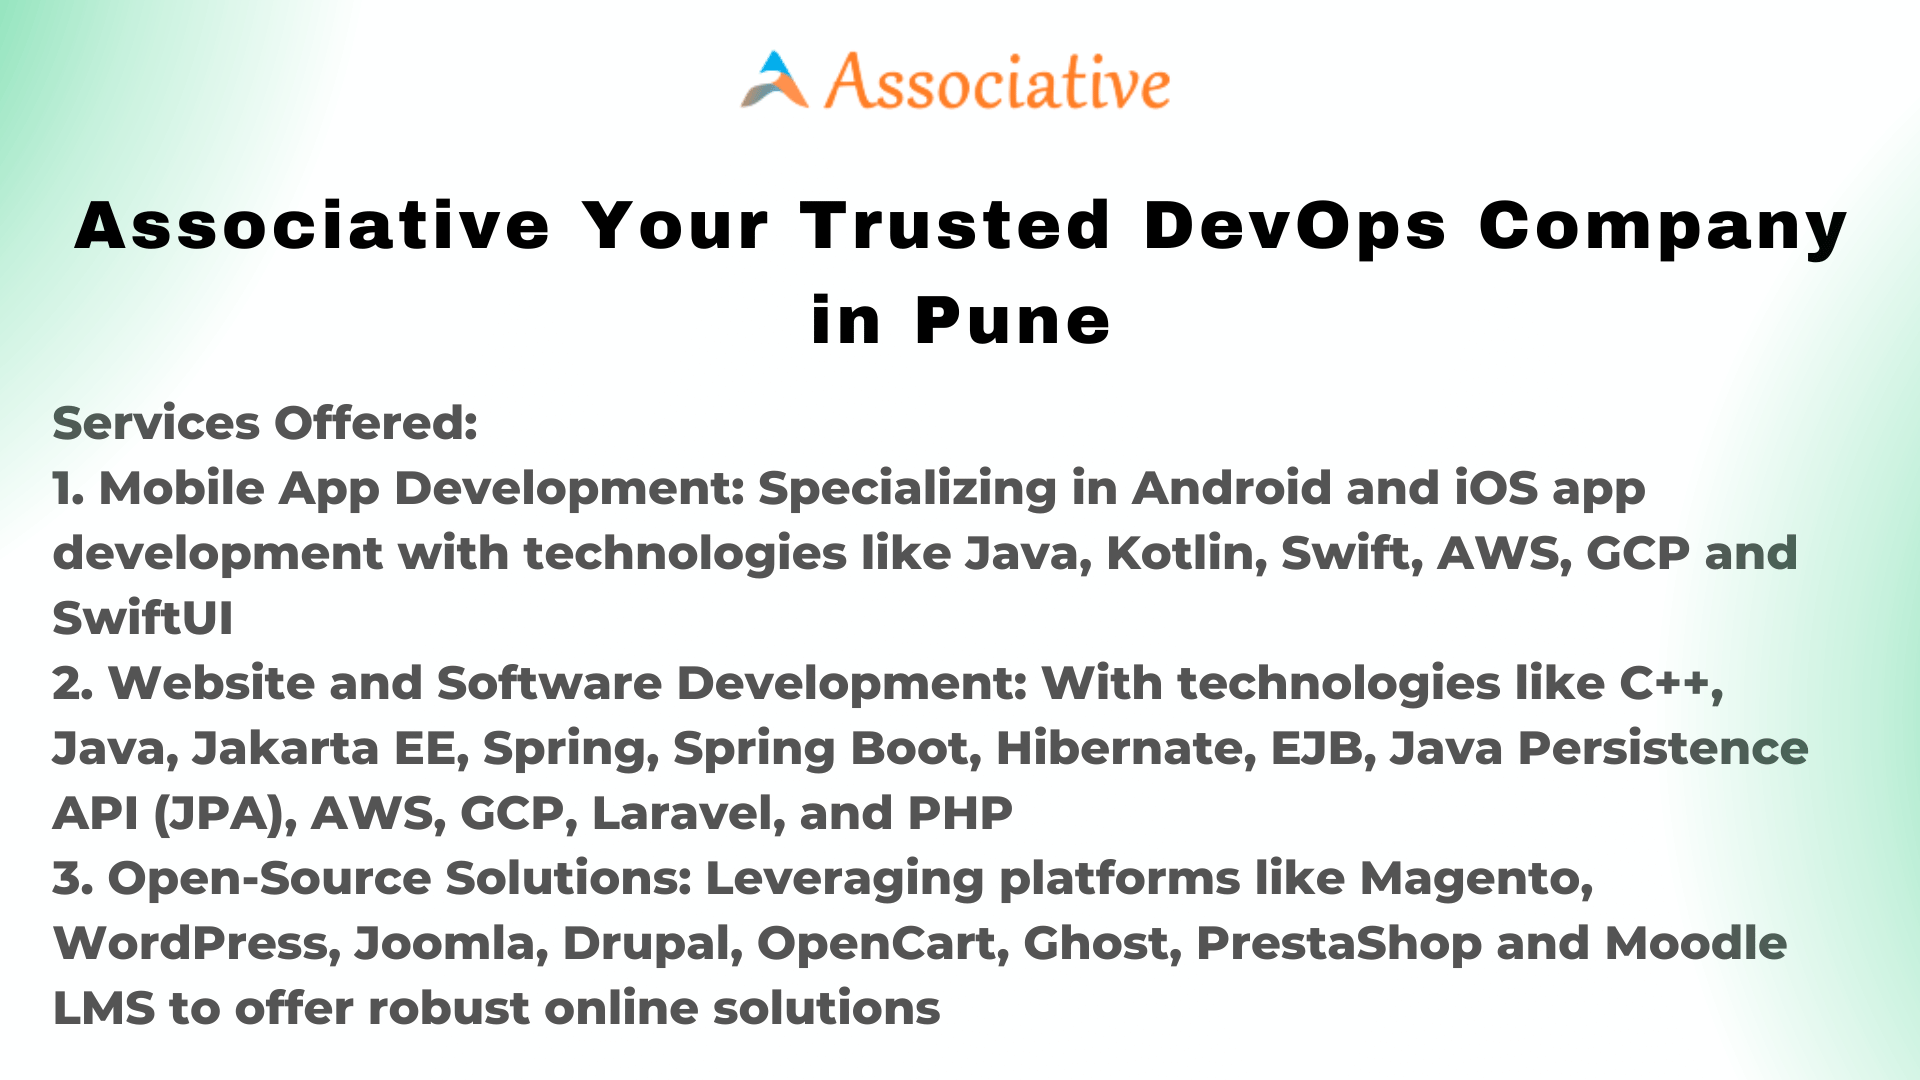 Associative Your Trusted DevOps Company in Pune